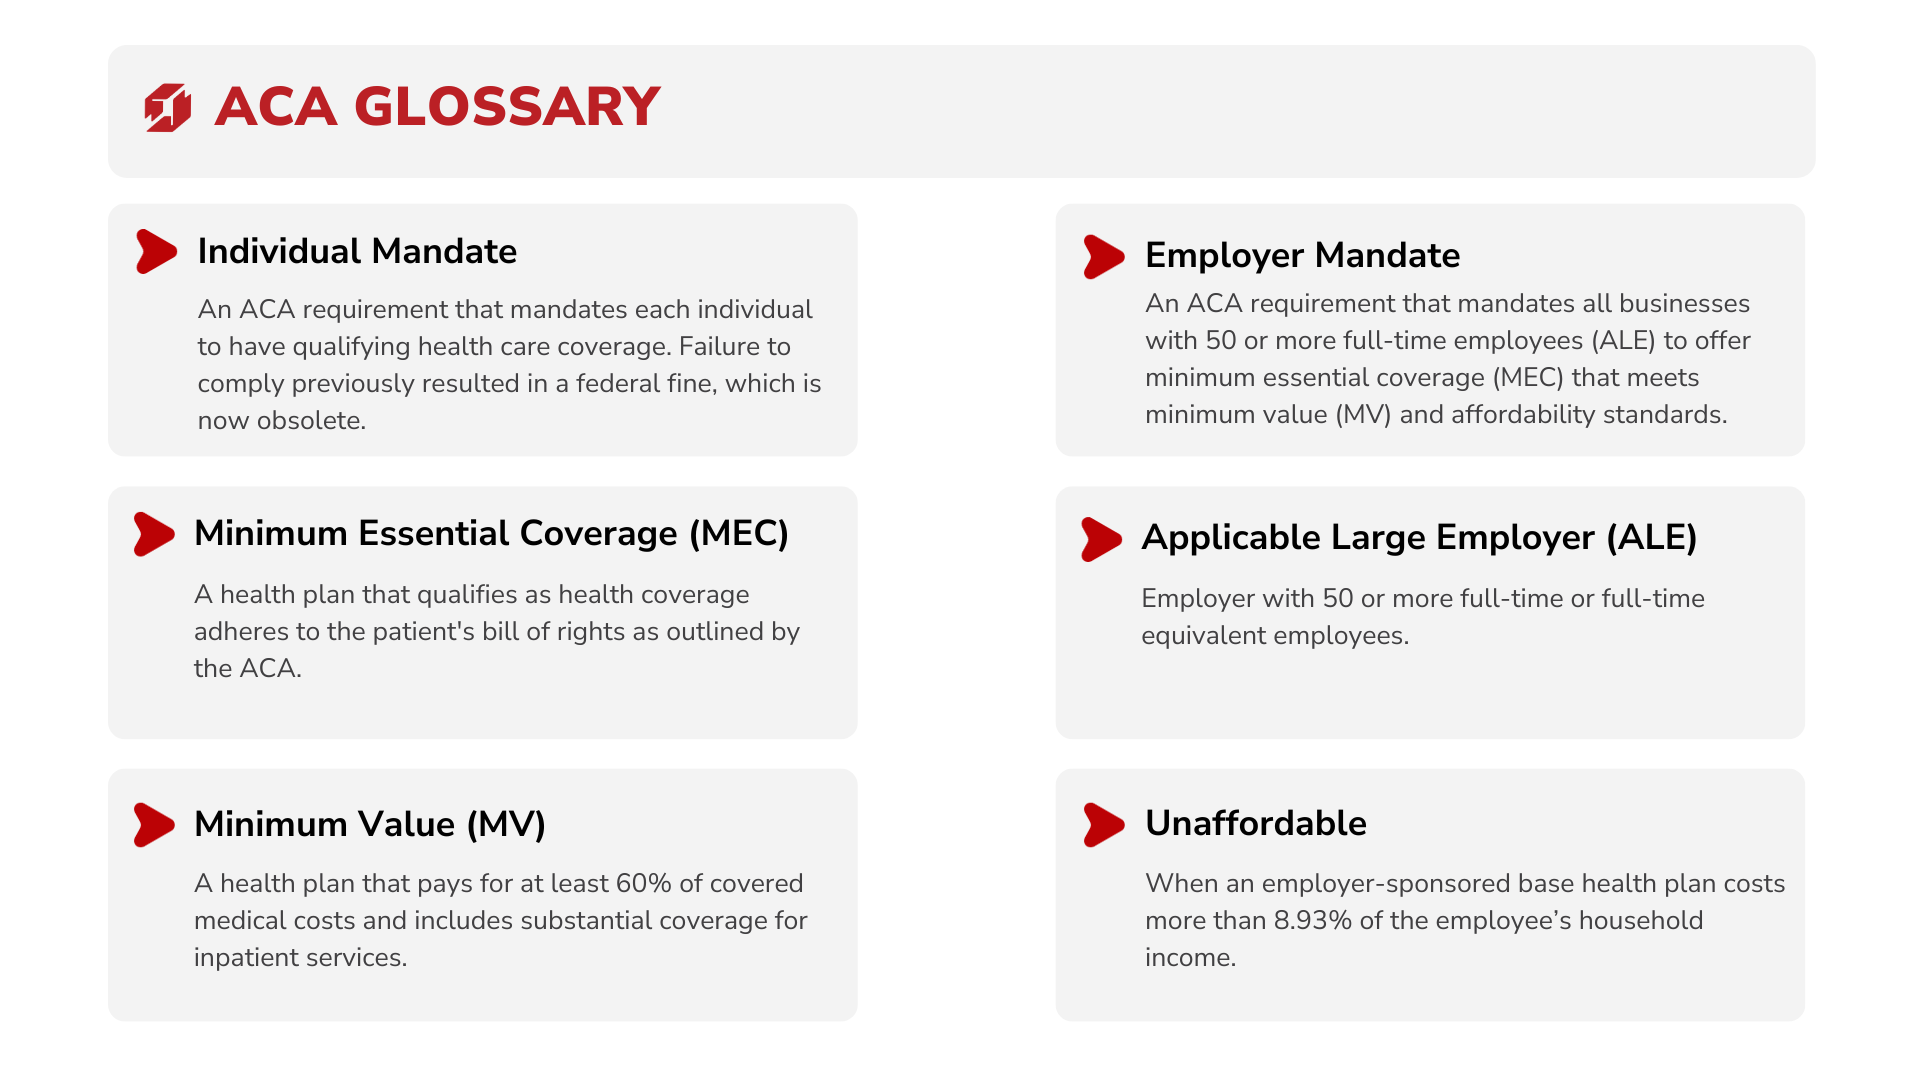 an aca glossary explains the individual mandate employer mandate minimum value and unaffordable